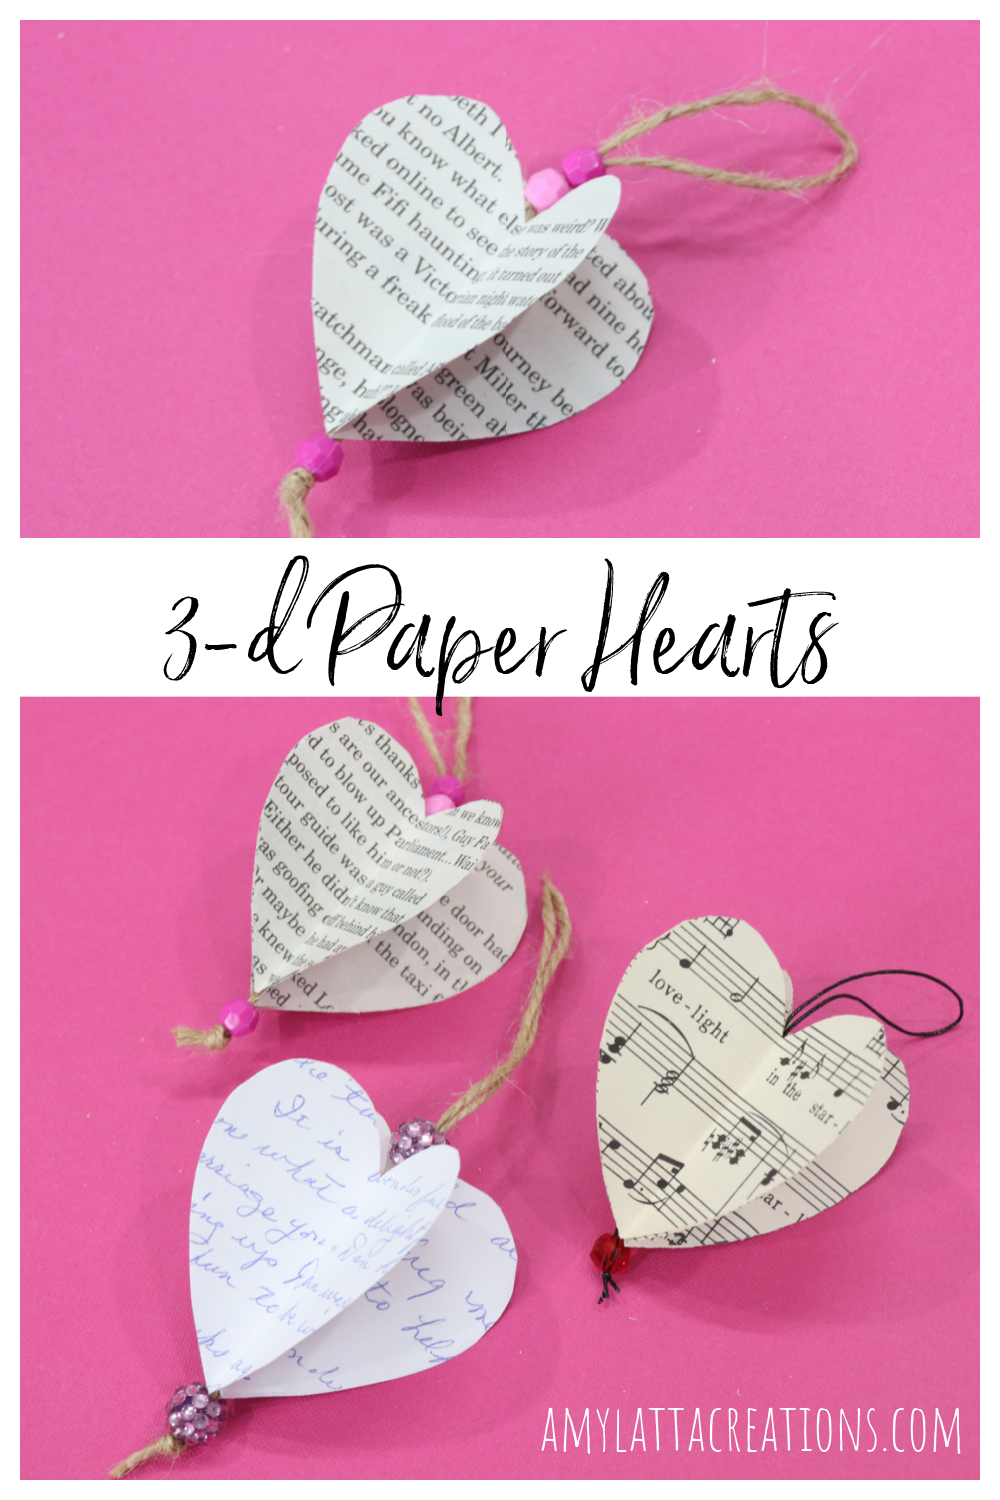 Image contains a collage of 3-D Paper hearts on a pink background.